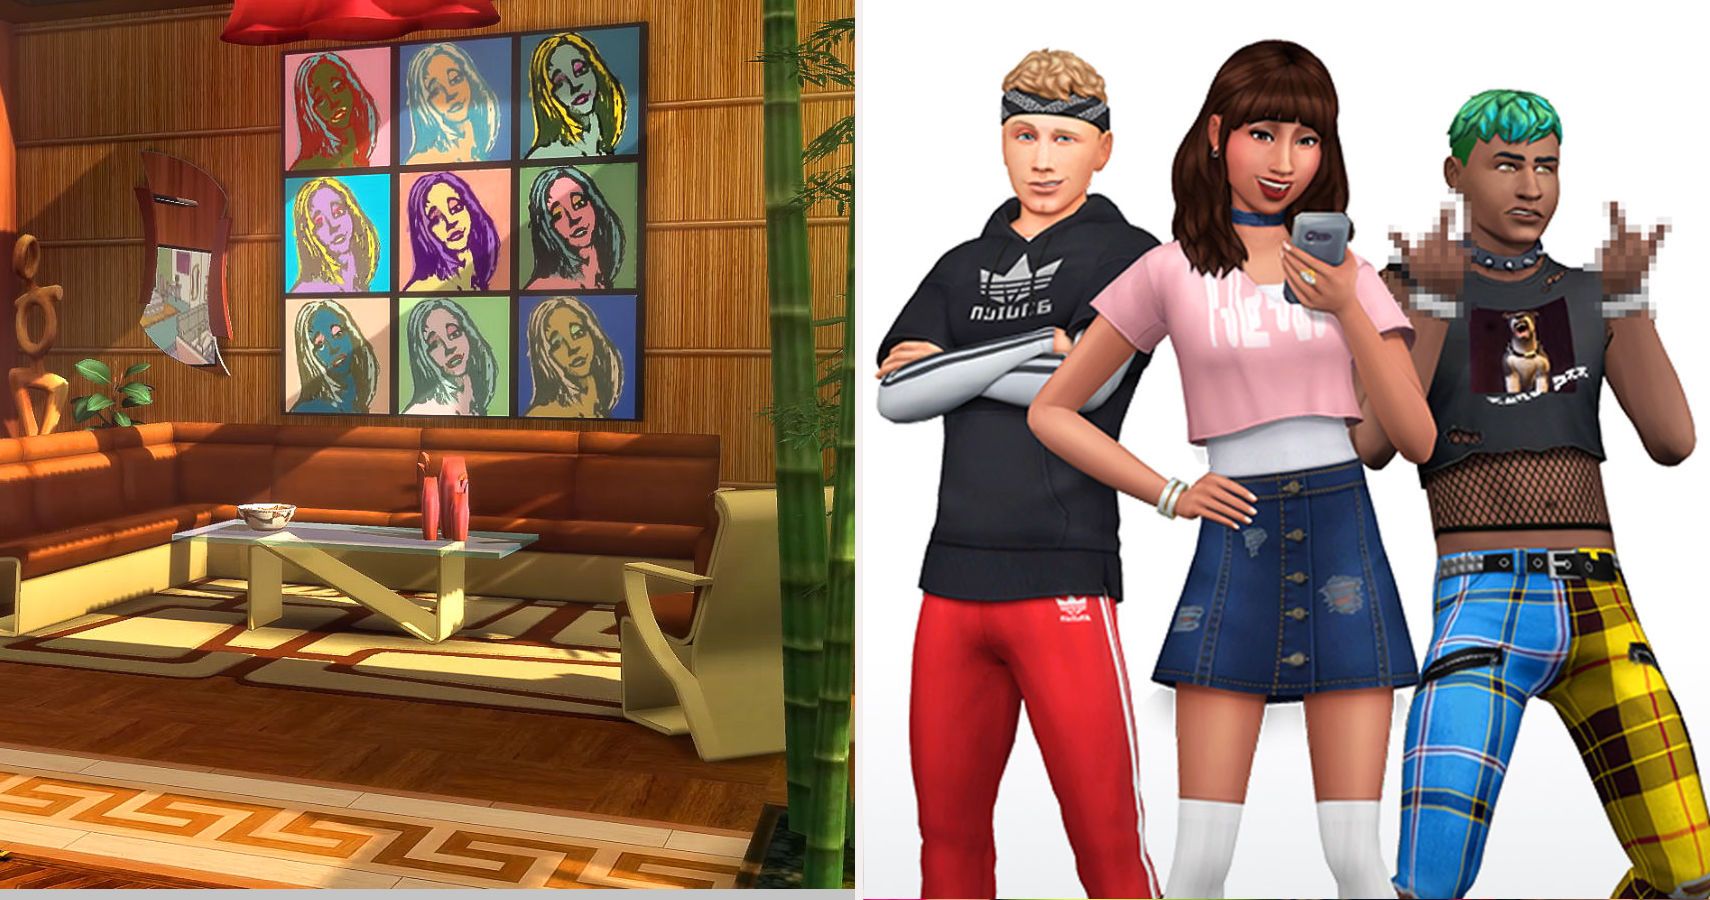 The Sims 4: Best Maxis Match CC Creators And Curators | TheGamer